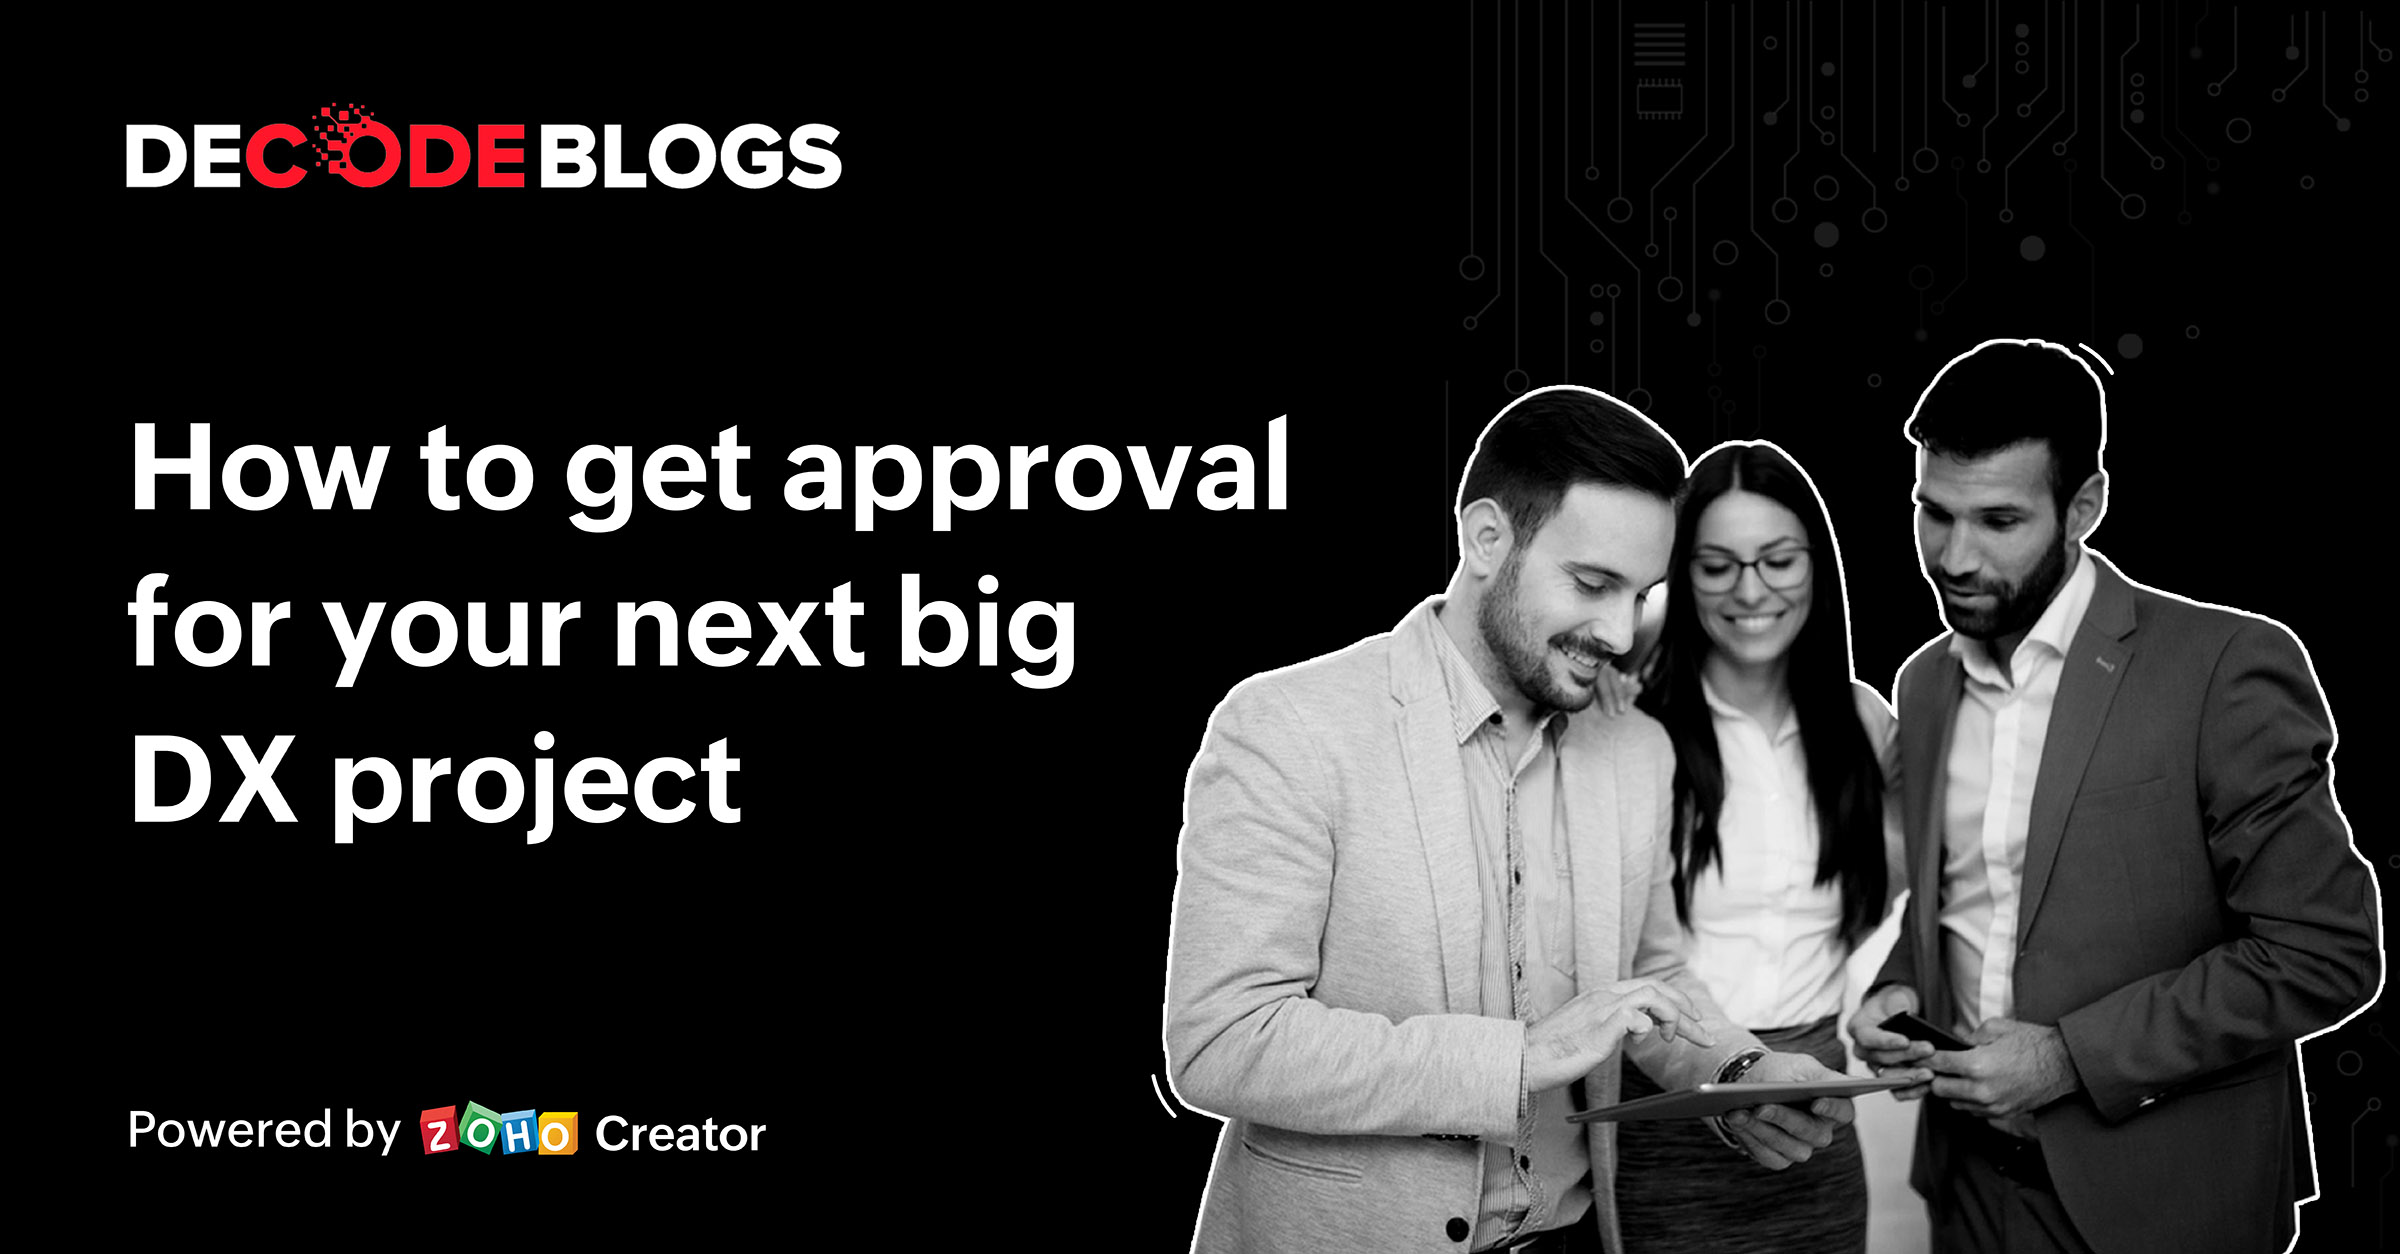 How to get approval for your next big DX project